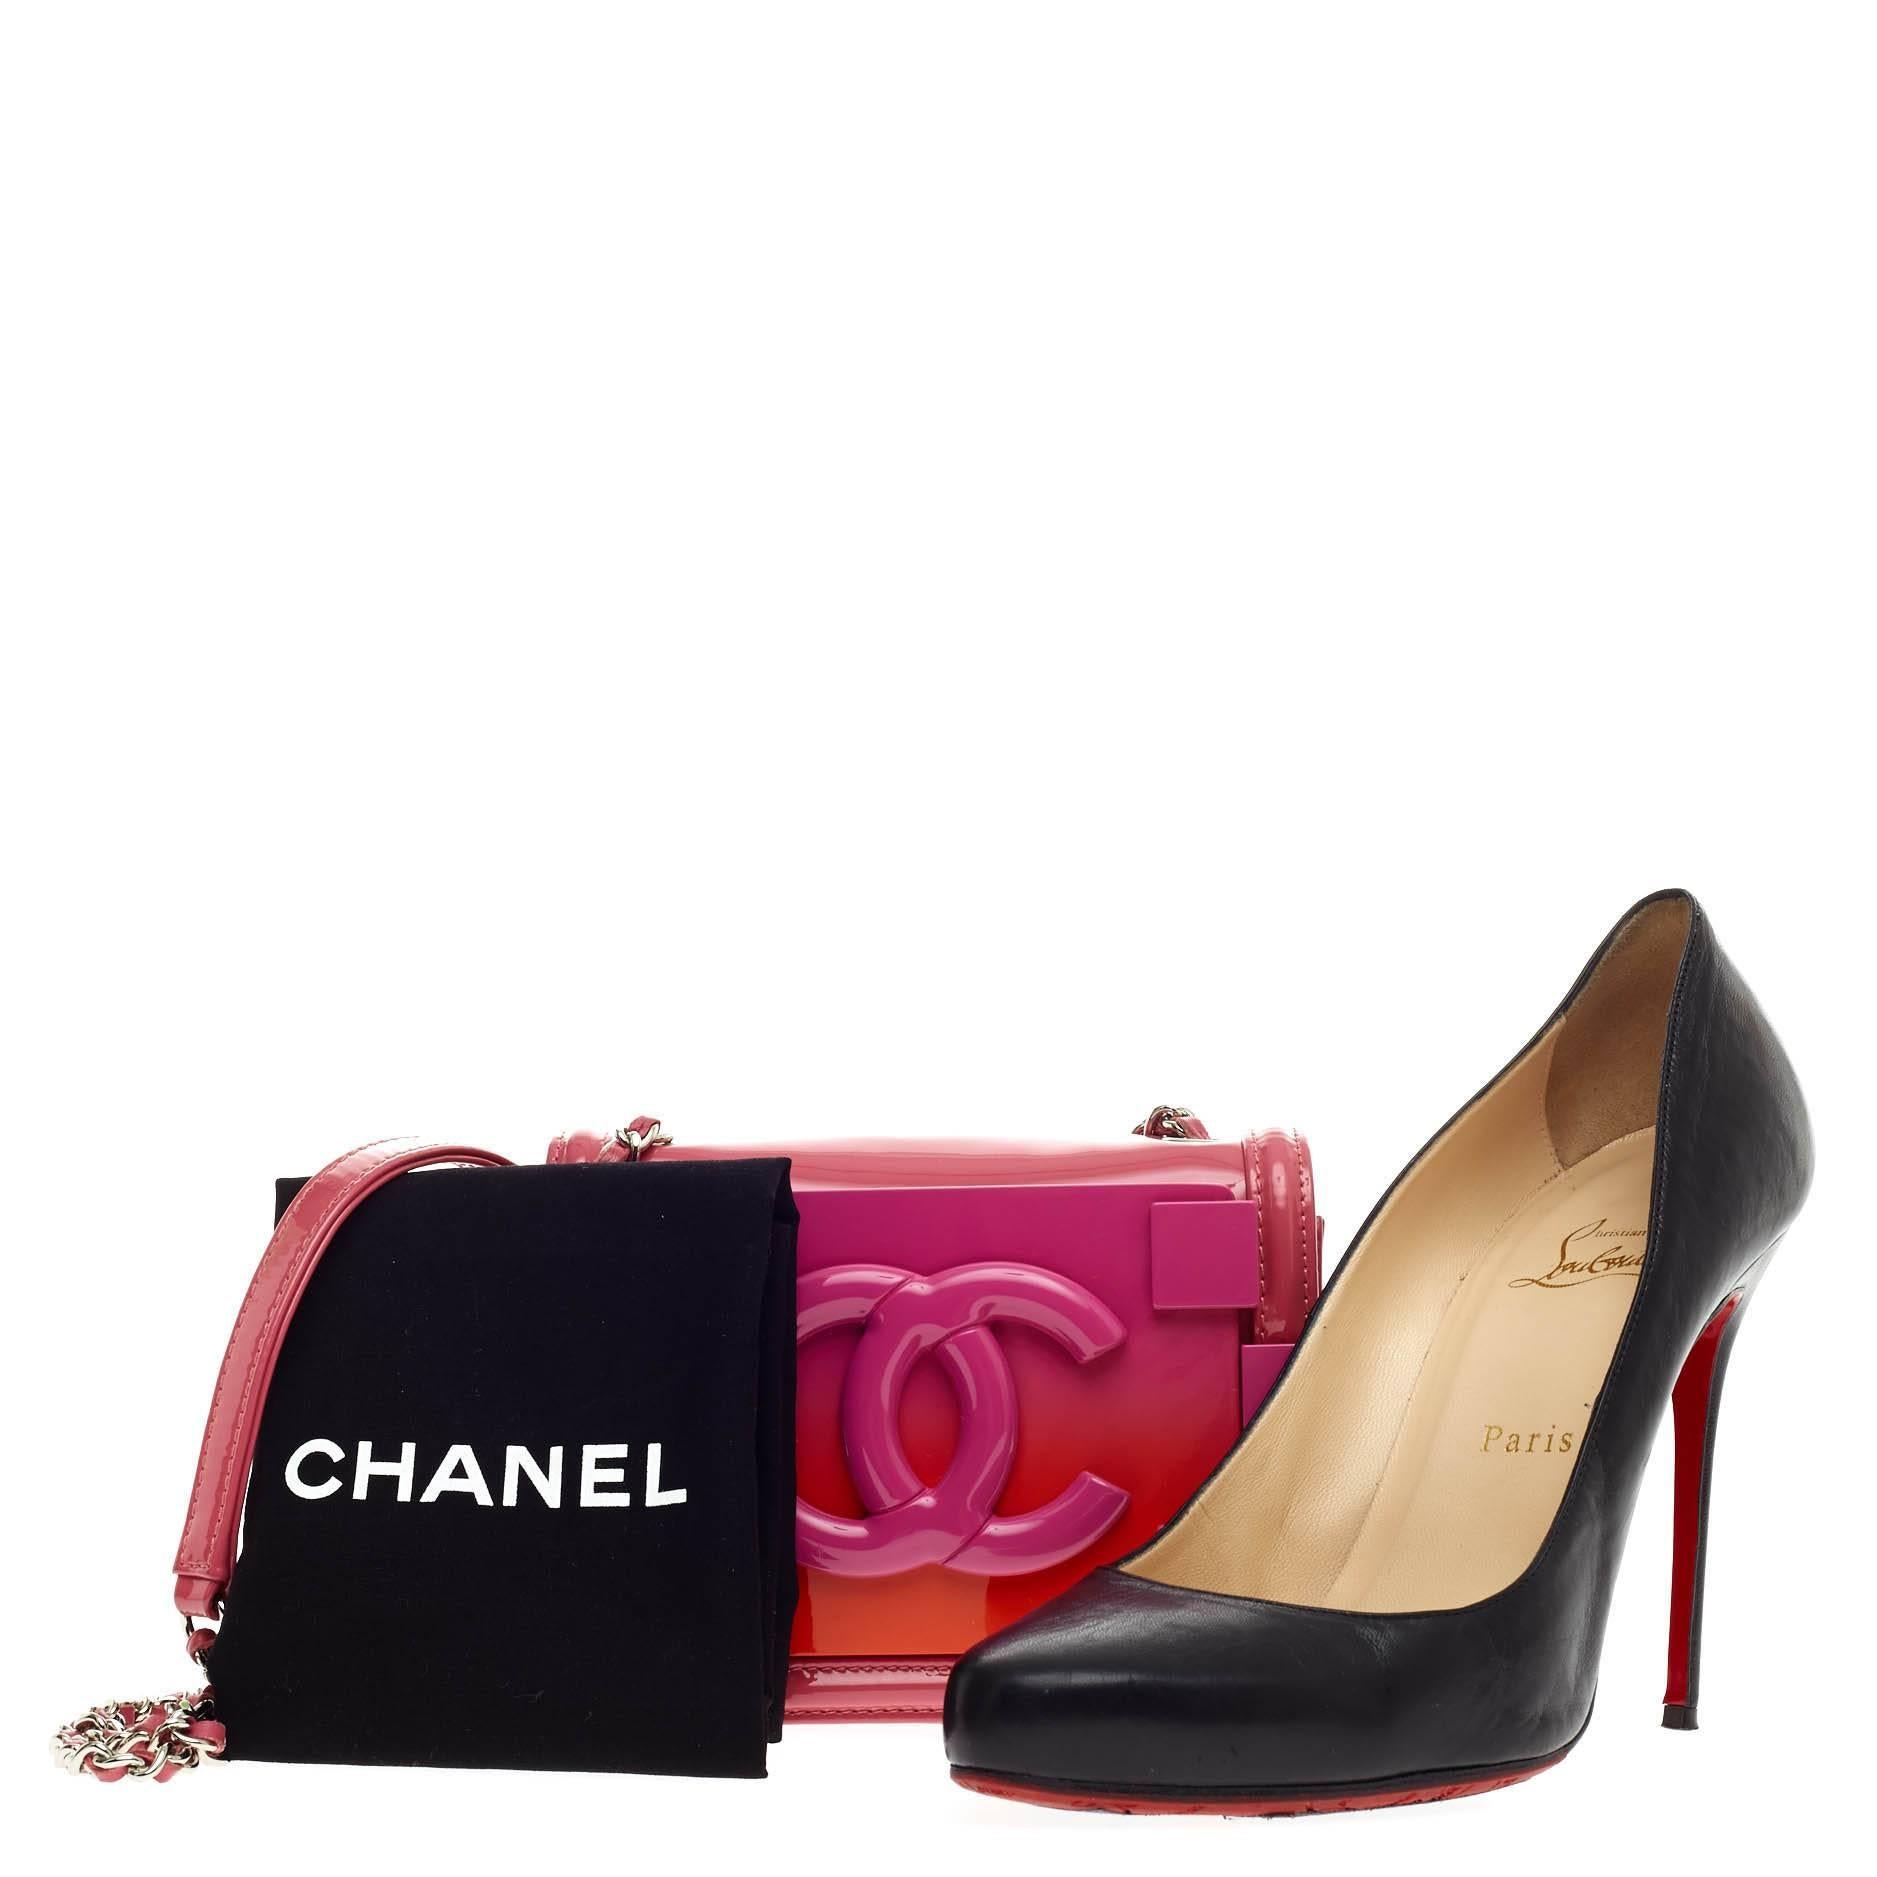 This authentic Chanel Boy Brick Flap Patent and Plexiglass Mini presented during the brand's Spring/Summer 2014 Collection merges avant-garde style with funky, high-art influences for a refreshingly inspired accessory. Crafted in pink patent leather